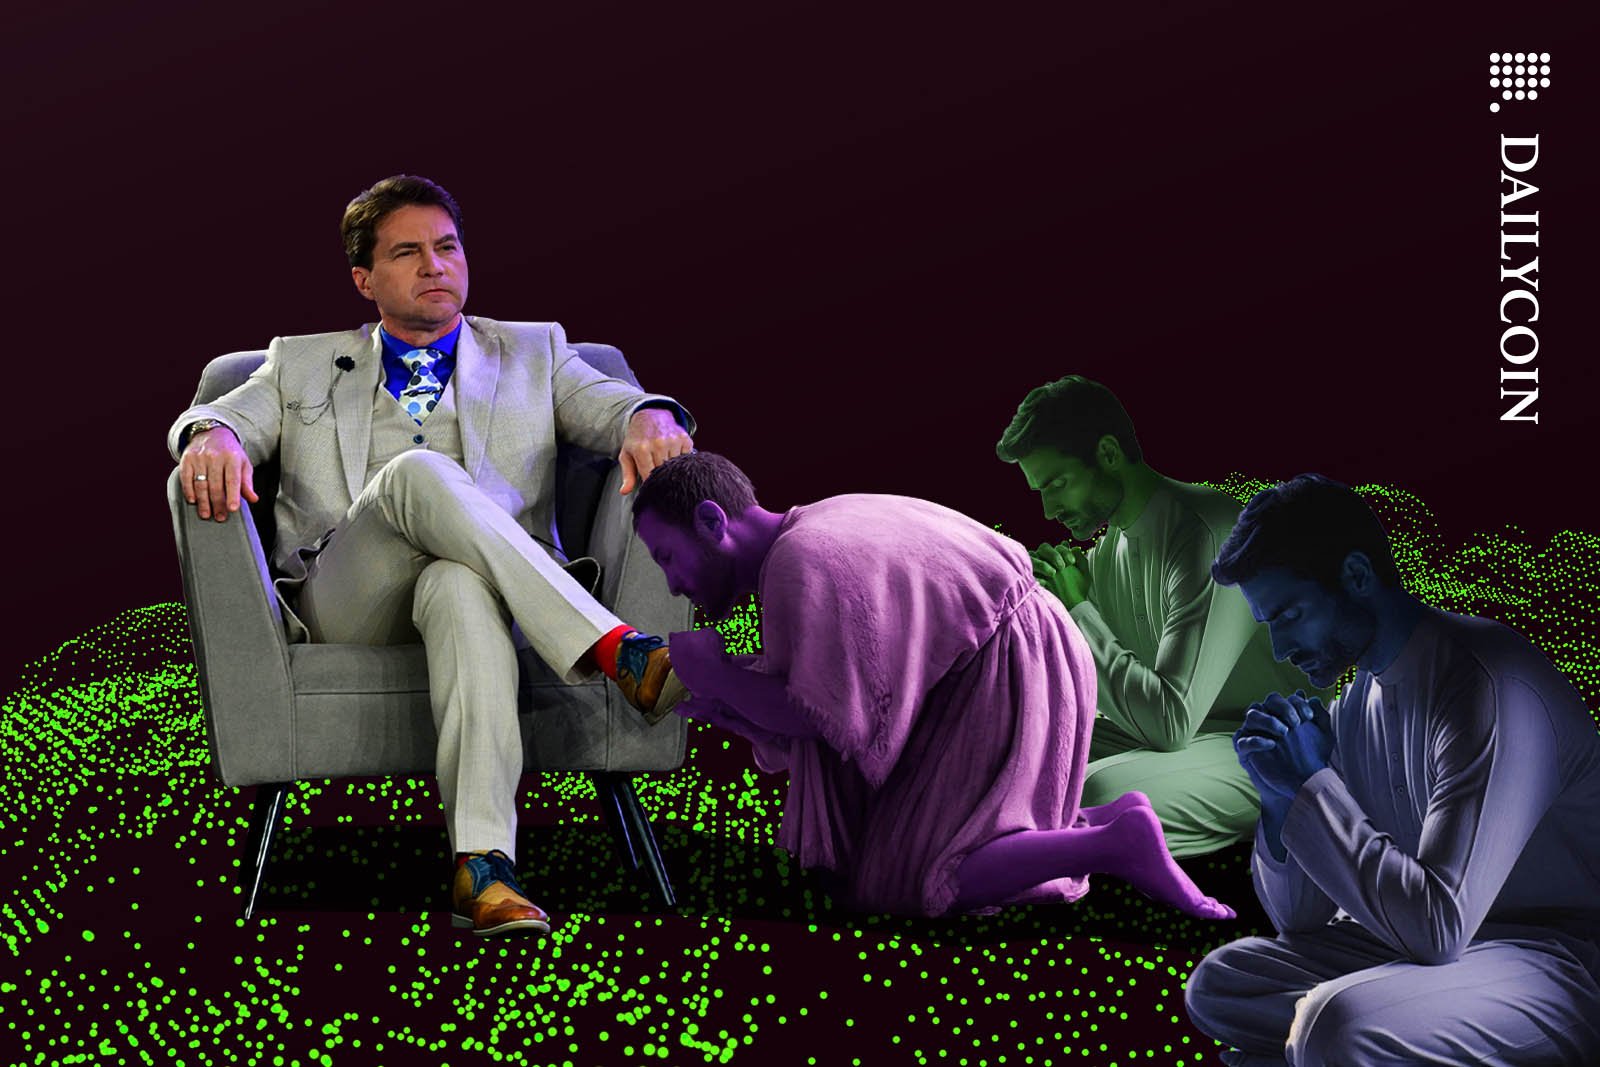 Craig Wright's foot being kissed by a worshipper.